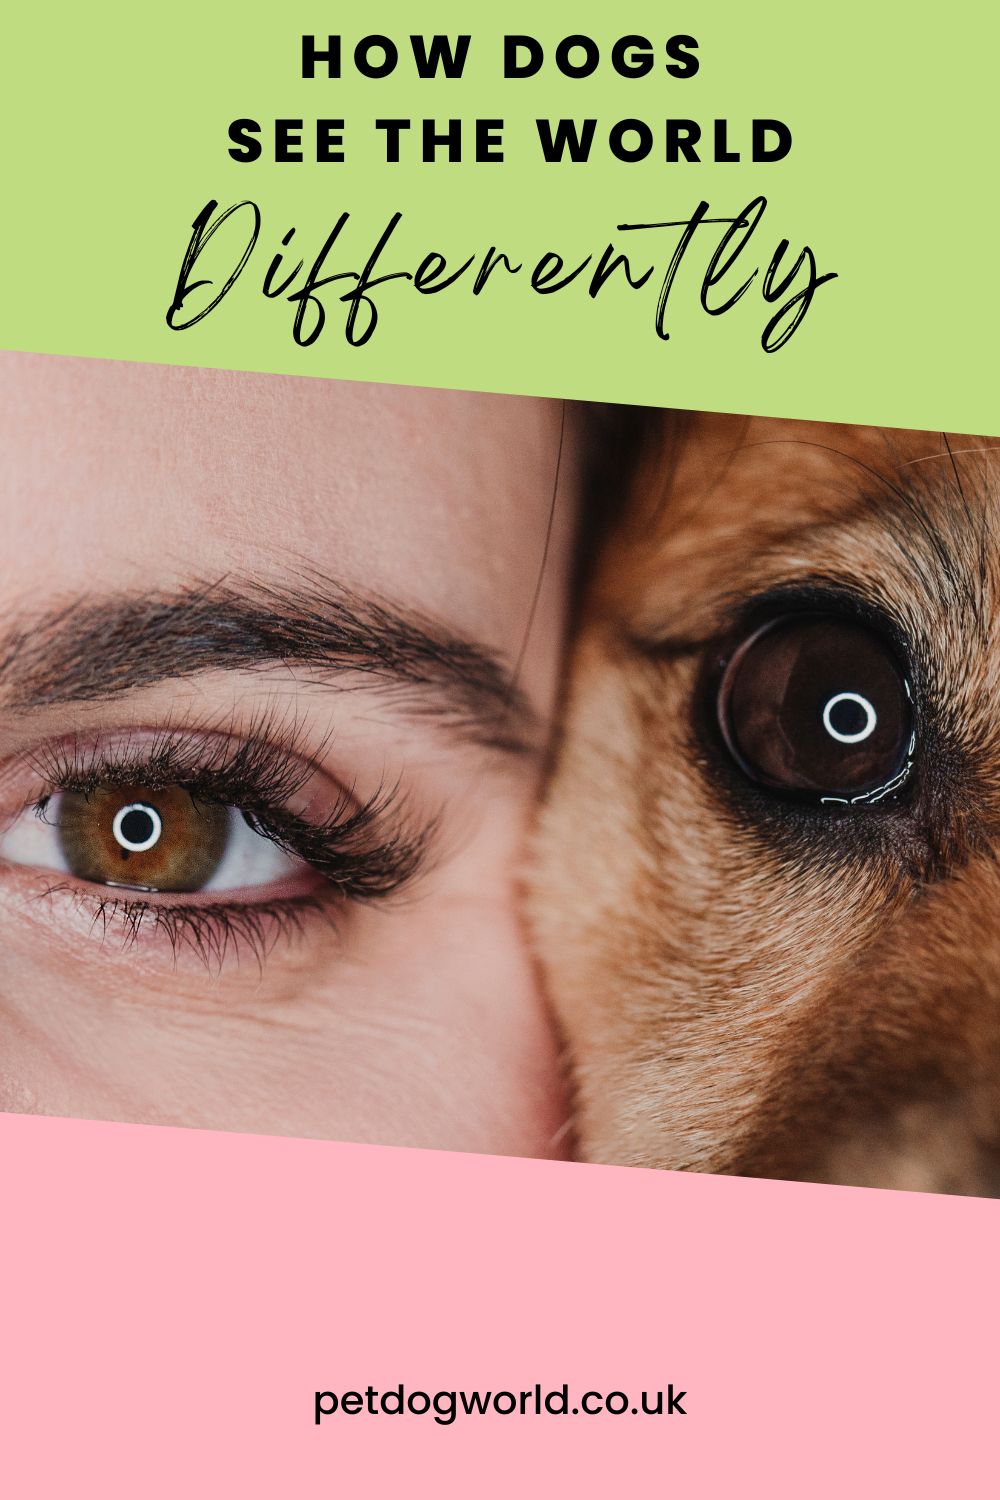 A blog post providing insightful details about canine vision, senses, and how these shape their unique perspective of the world.